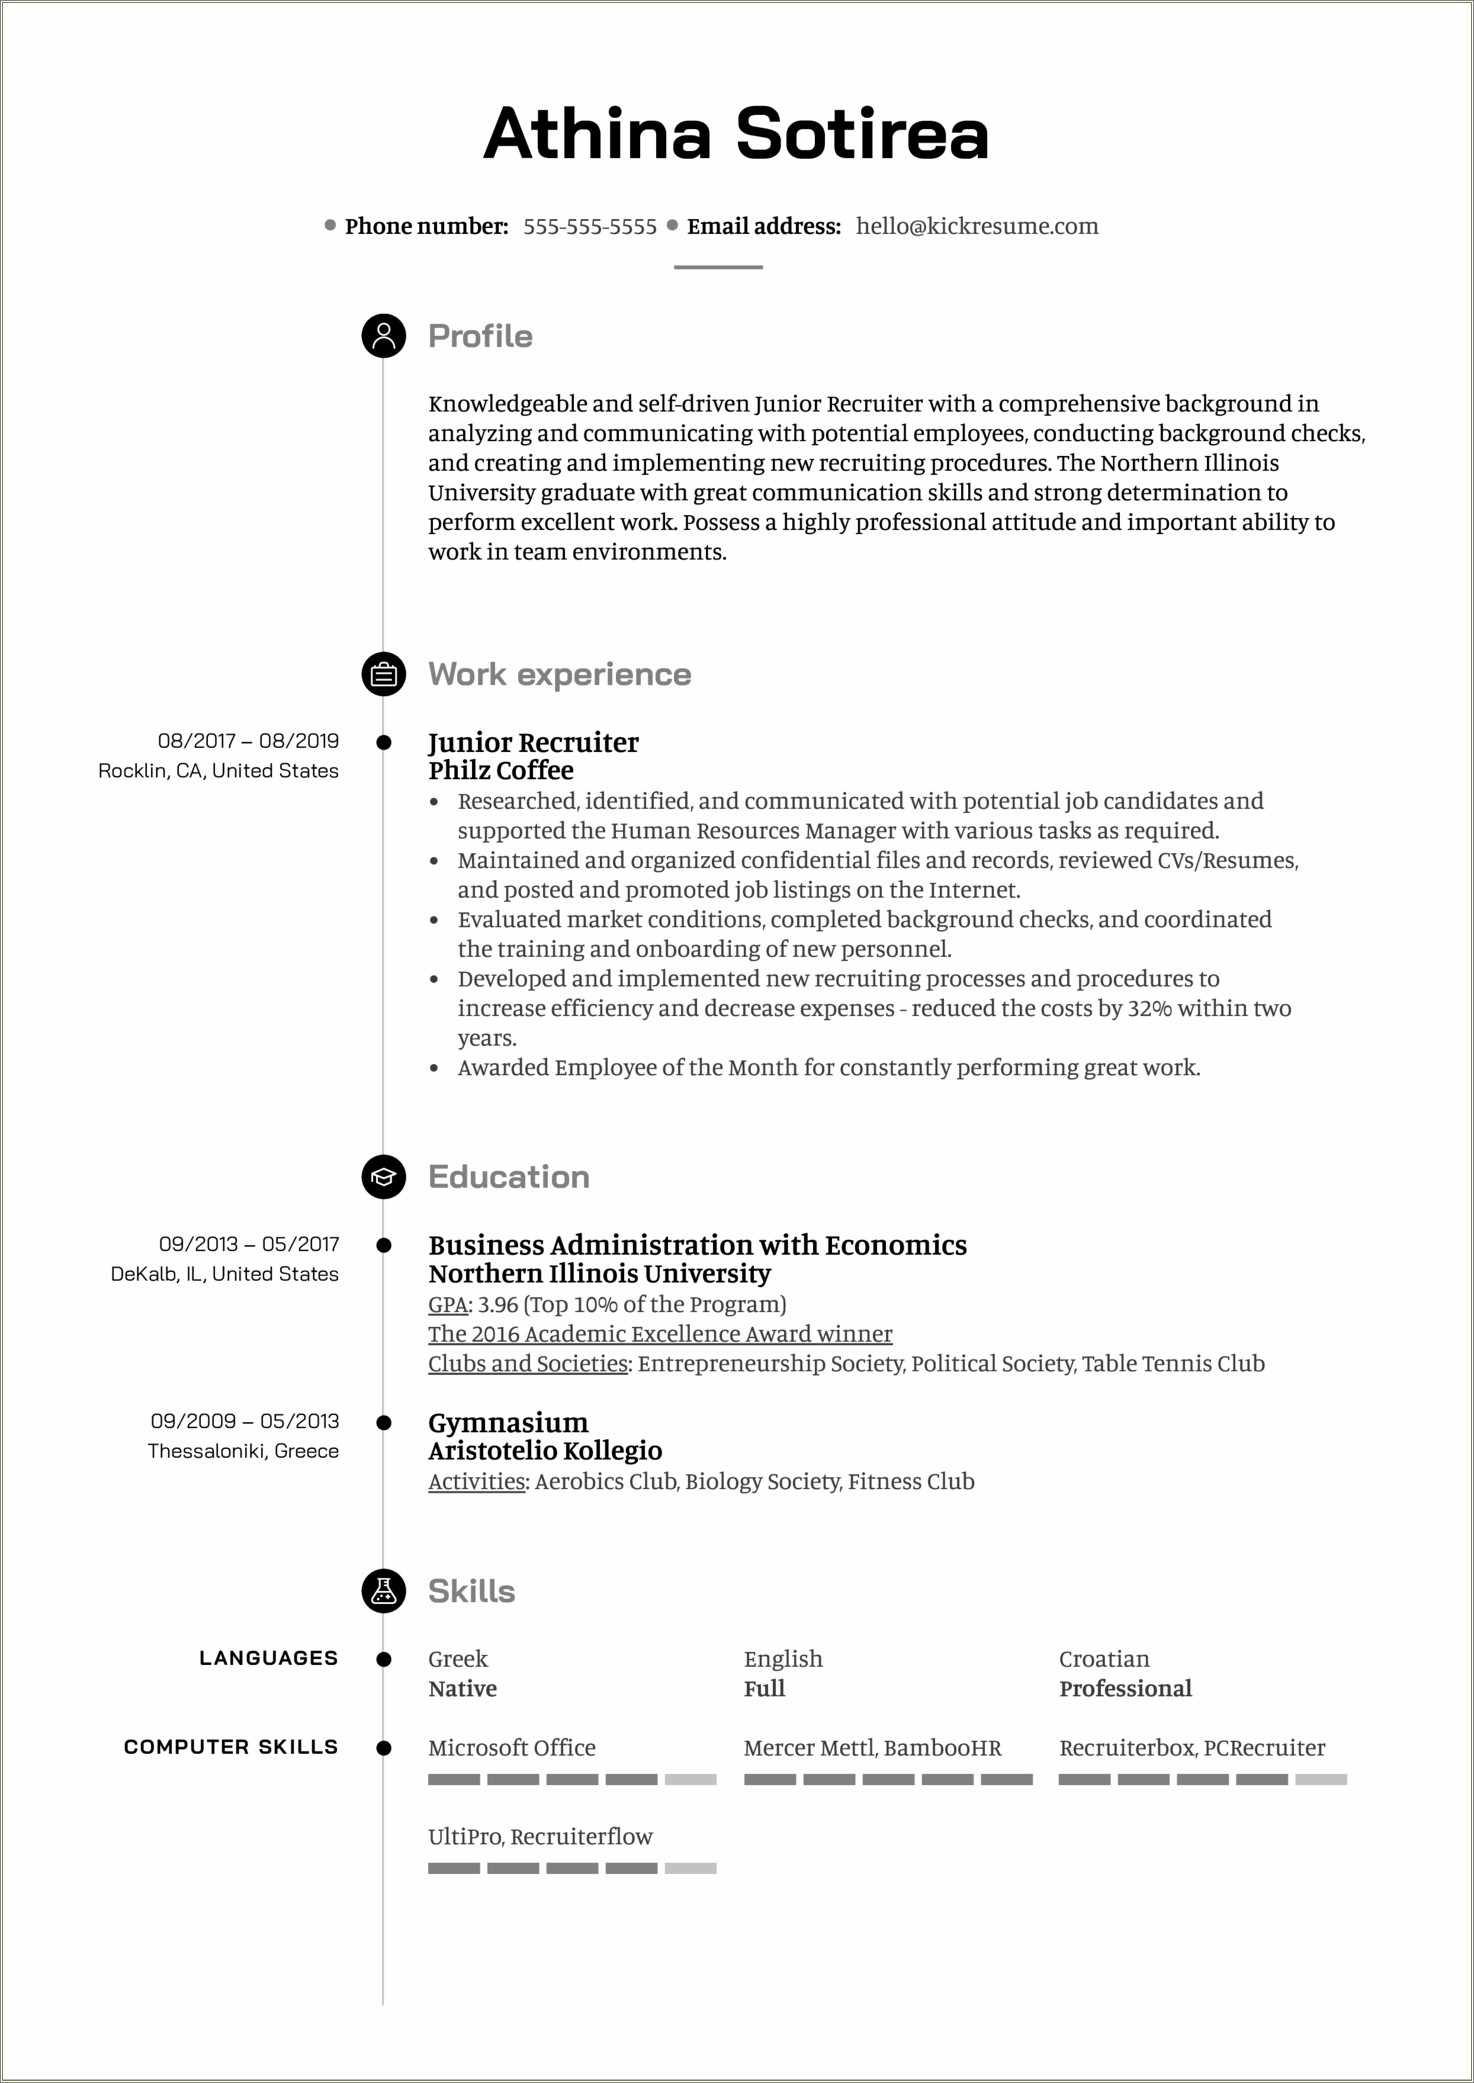 Free Resume For Recruiters In India